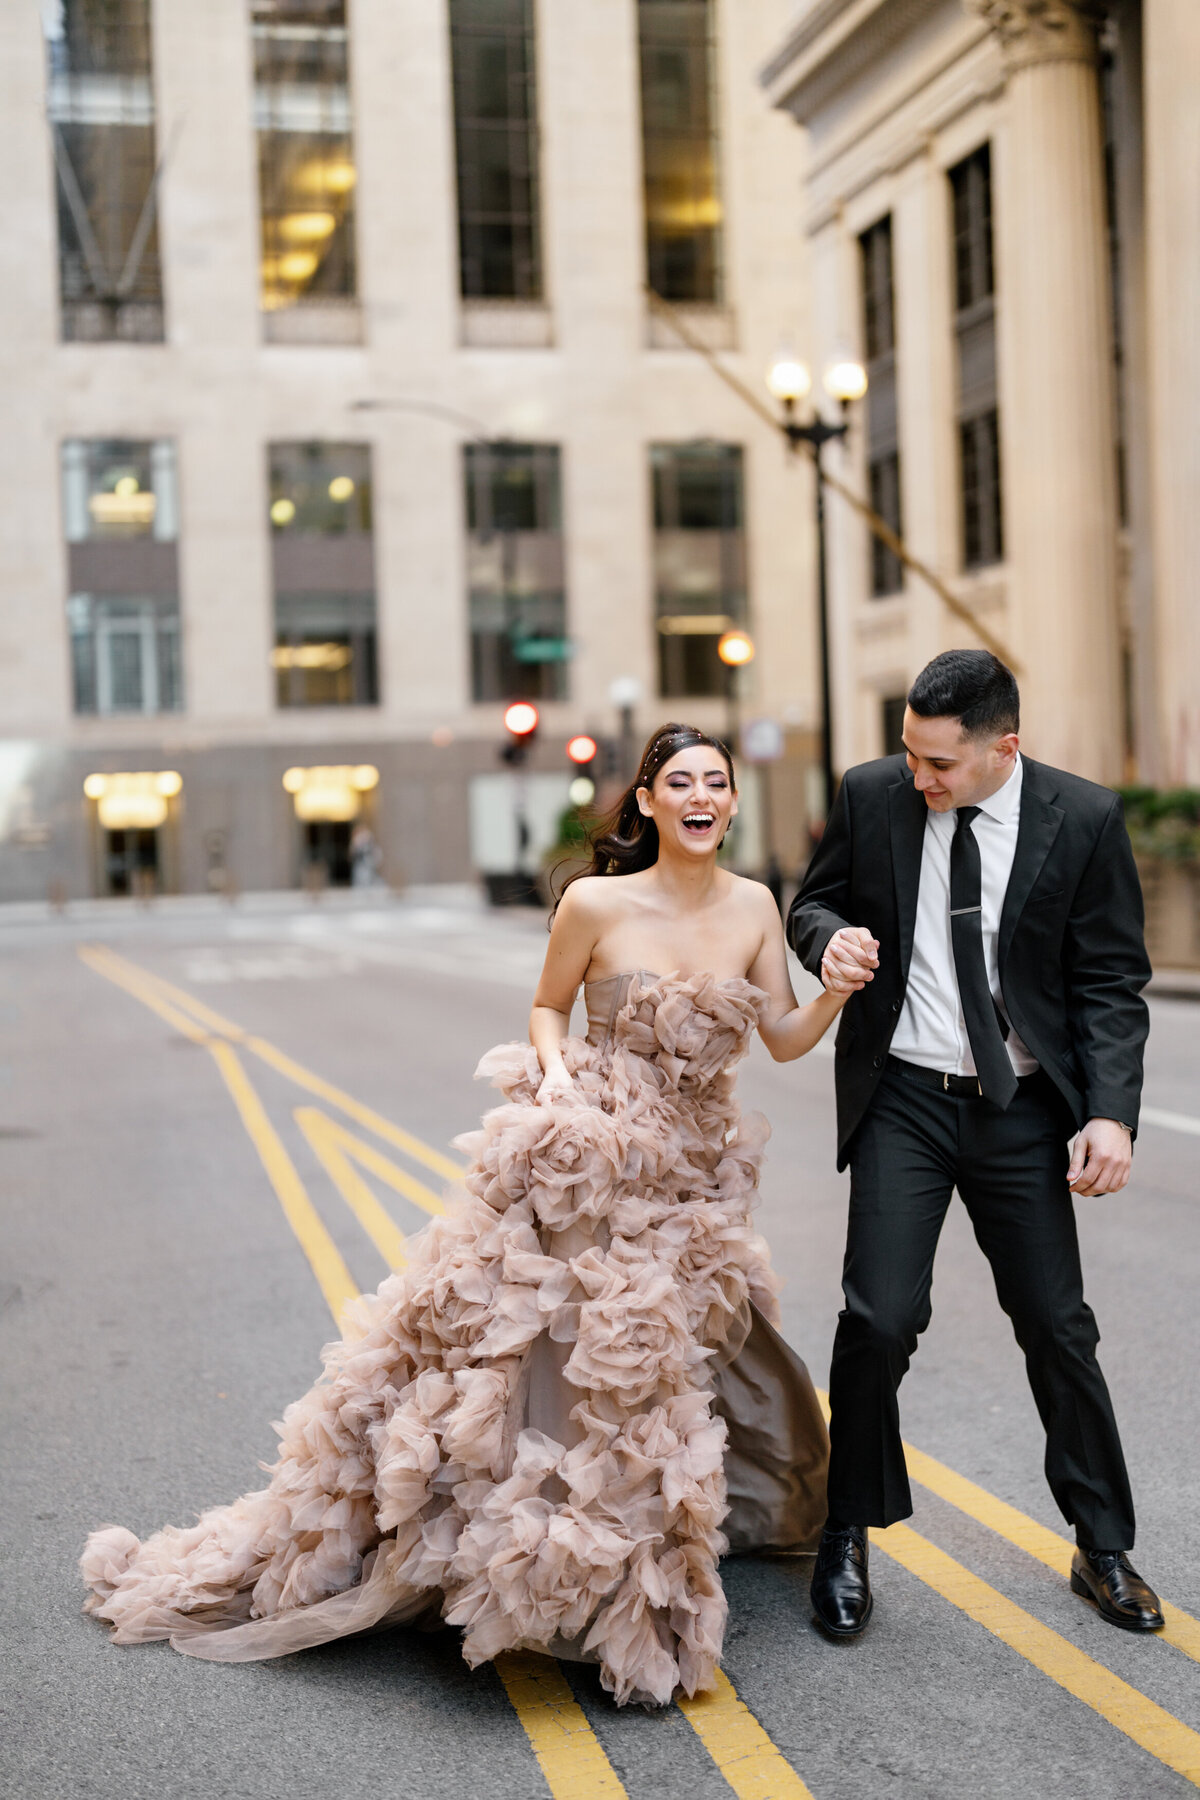 Aspen-Avenue-Chicago-Wedding-Photographer-Rookery-Engagement-Session-Histoircal-Stairs-Moody-Dramatic-Magazine-Unique-Gown-Stemming-From-Love-Emily-Rae-Bridal-Hair-FAV-75